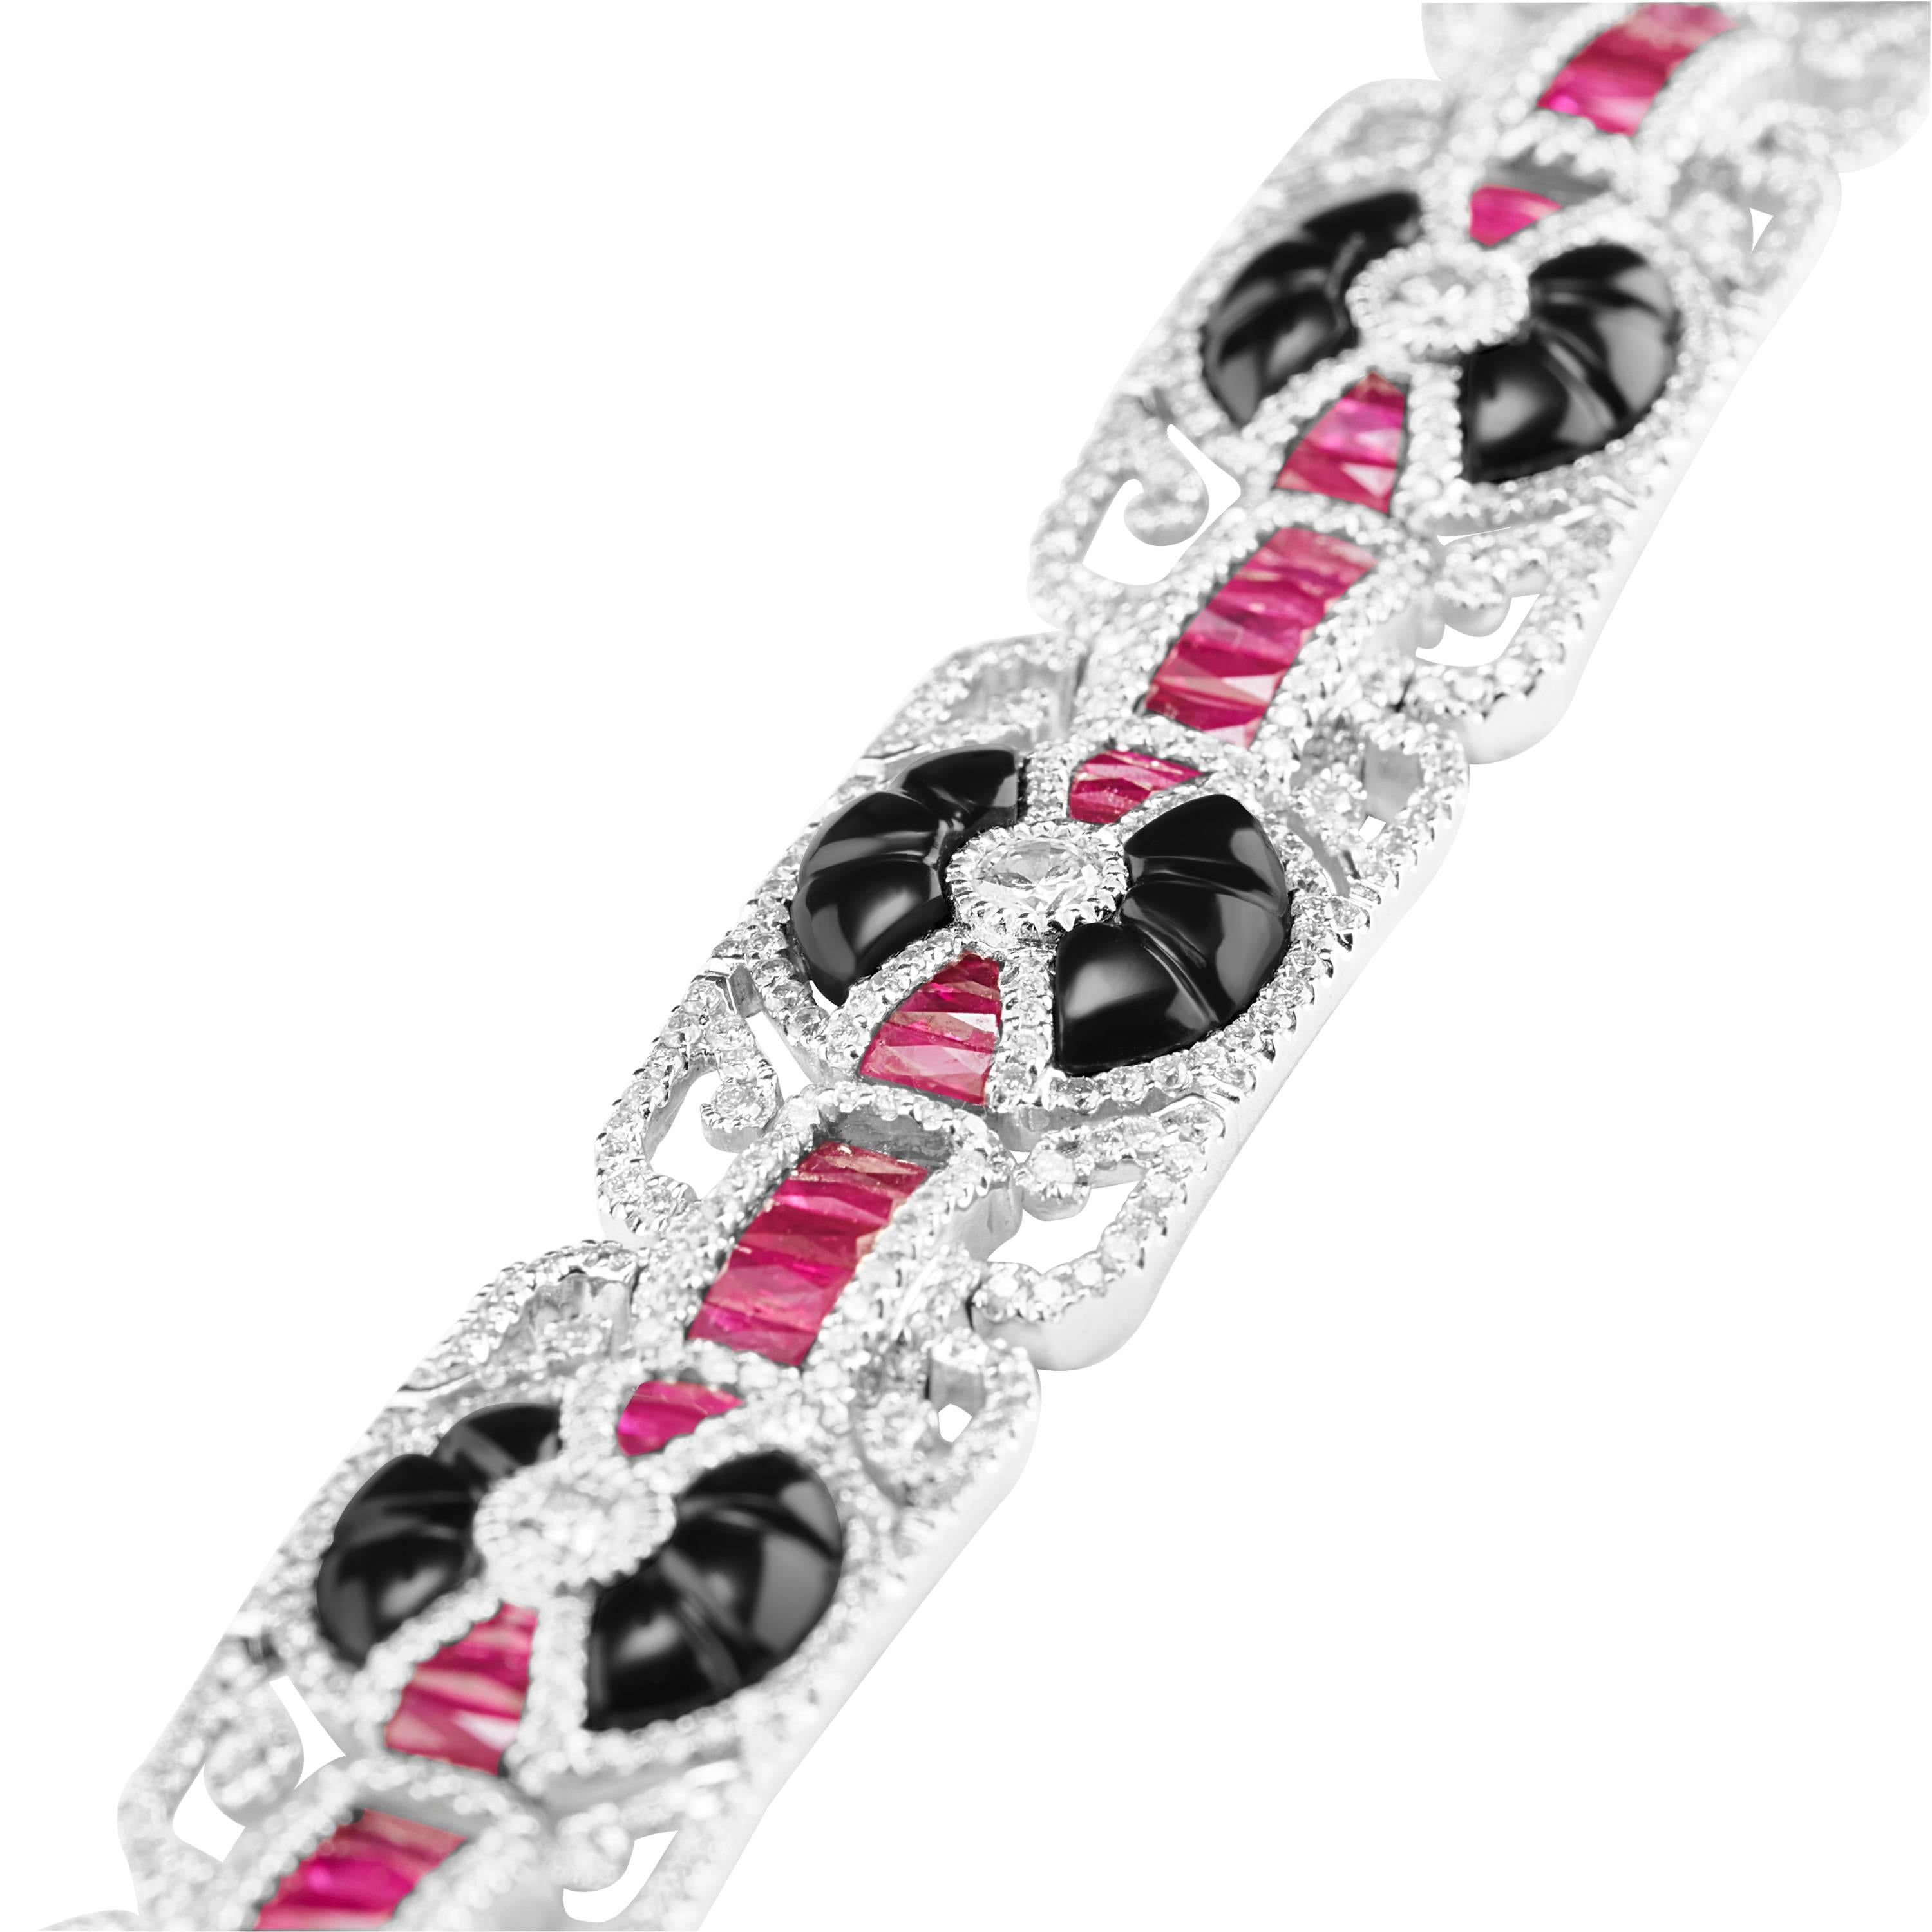 This solid 18 Carat White Gold Onyx Ruby and Diamond Bracelet.
Extremely beautifully made with so much passion and love and is our favourite pick.
Ruby weighs 8.47 Carats. 
Diamond weighs 5.36 Carats.
All stones are SI in clarity and are GH in